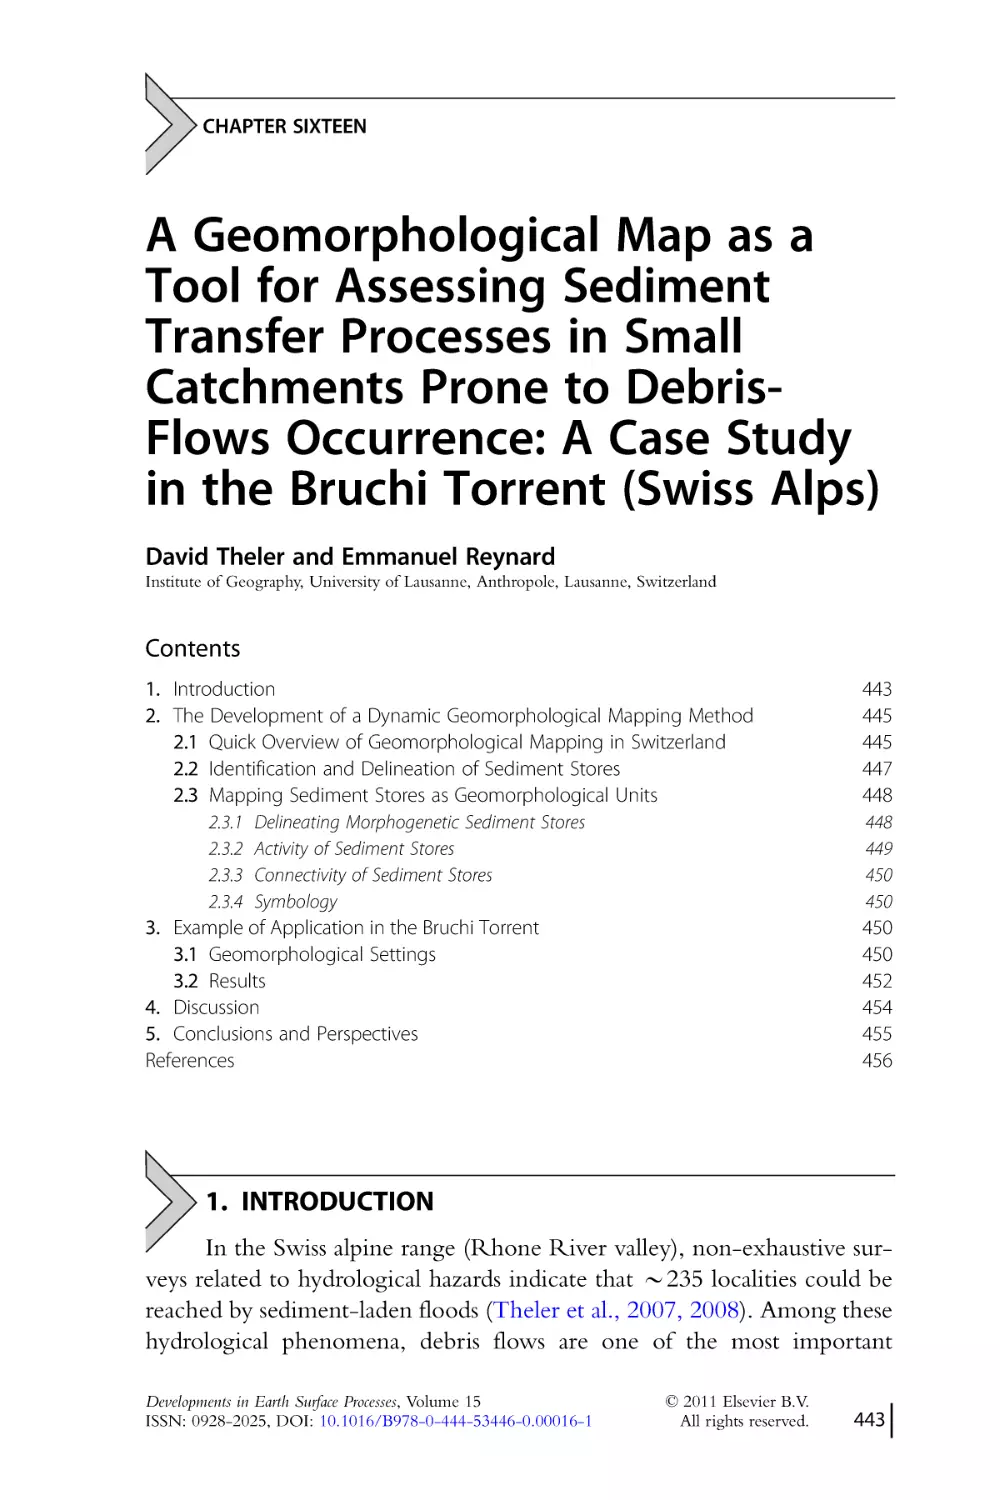 CHAPTER SIXTEEN.
A Geomorphological Map as a
Tool for Assessing Sediment
Transfer Processes in Small
Catchments Prone to Debris-
Flows Occurrence
1. Introduction